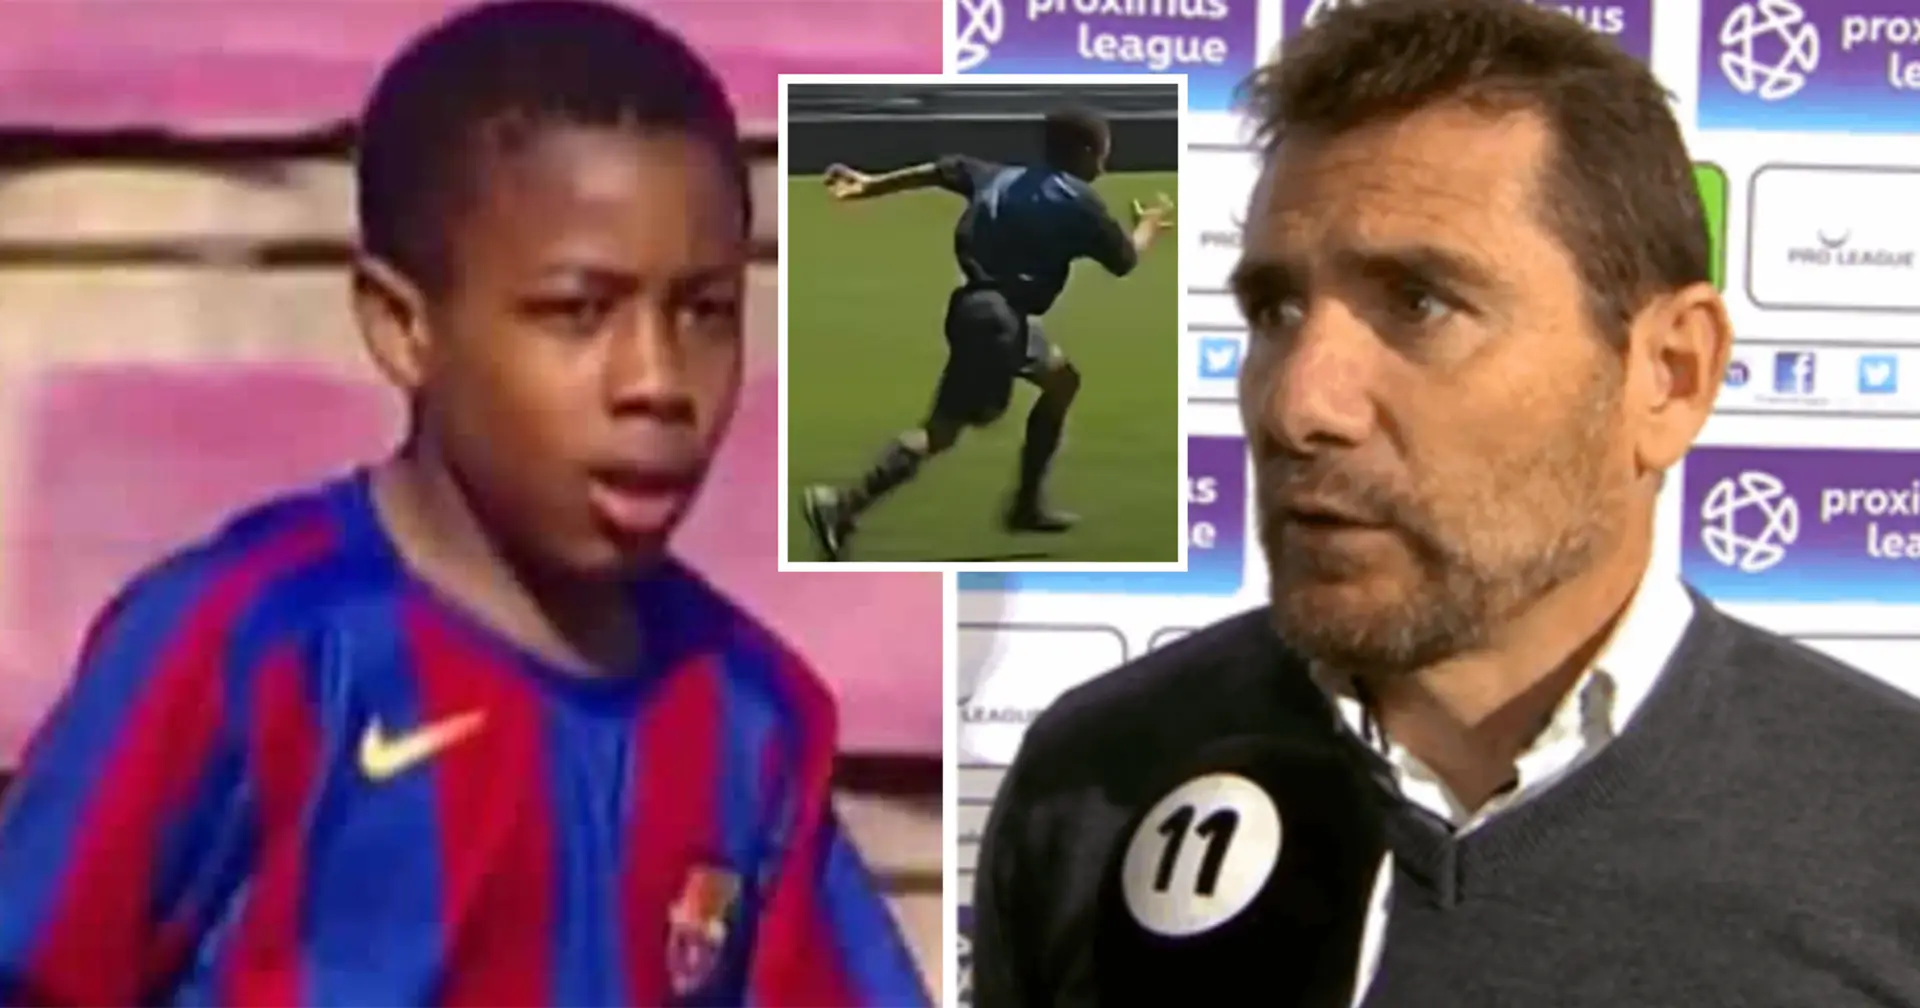 'Adama just took off and recovered the ball': Traore's ex-coach recalls one crazy episode from 2004